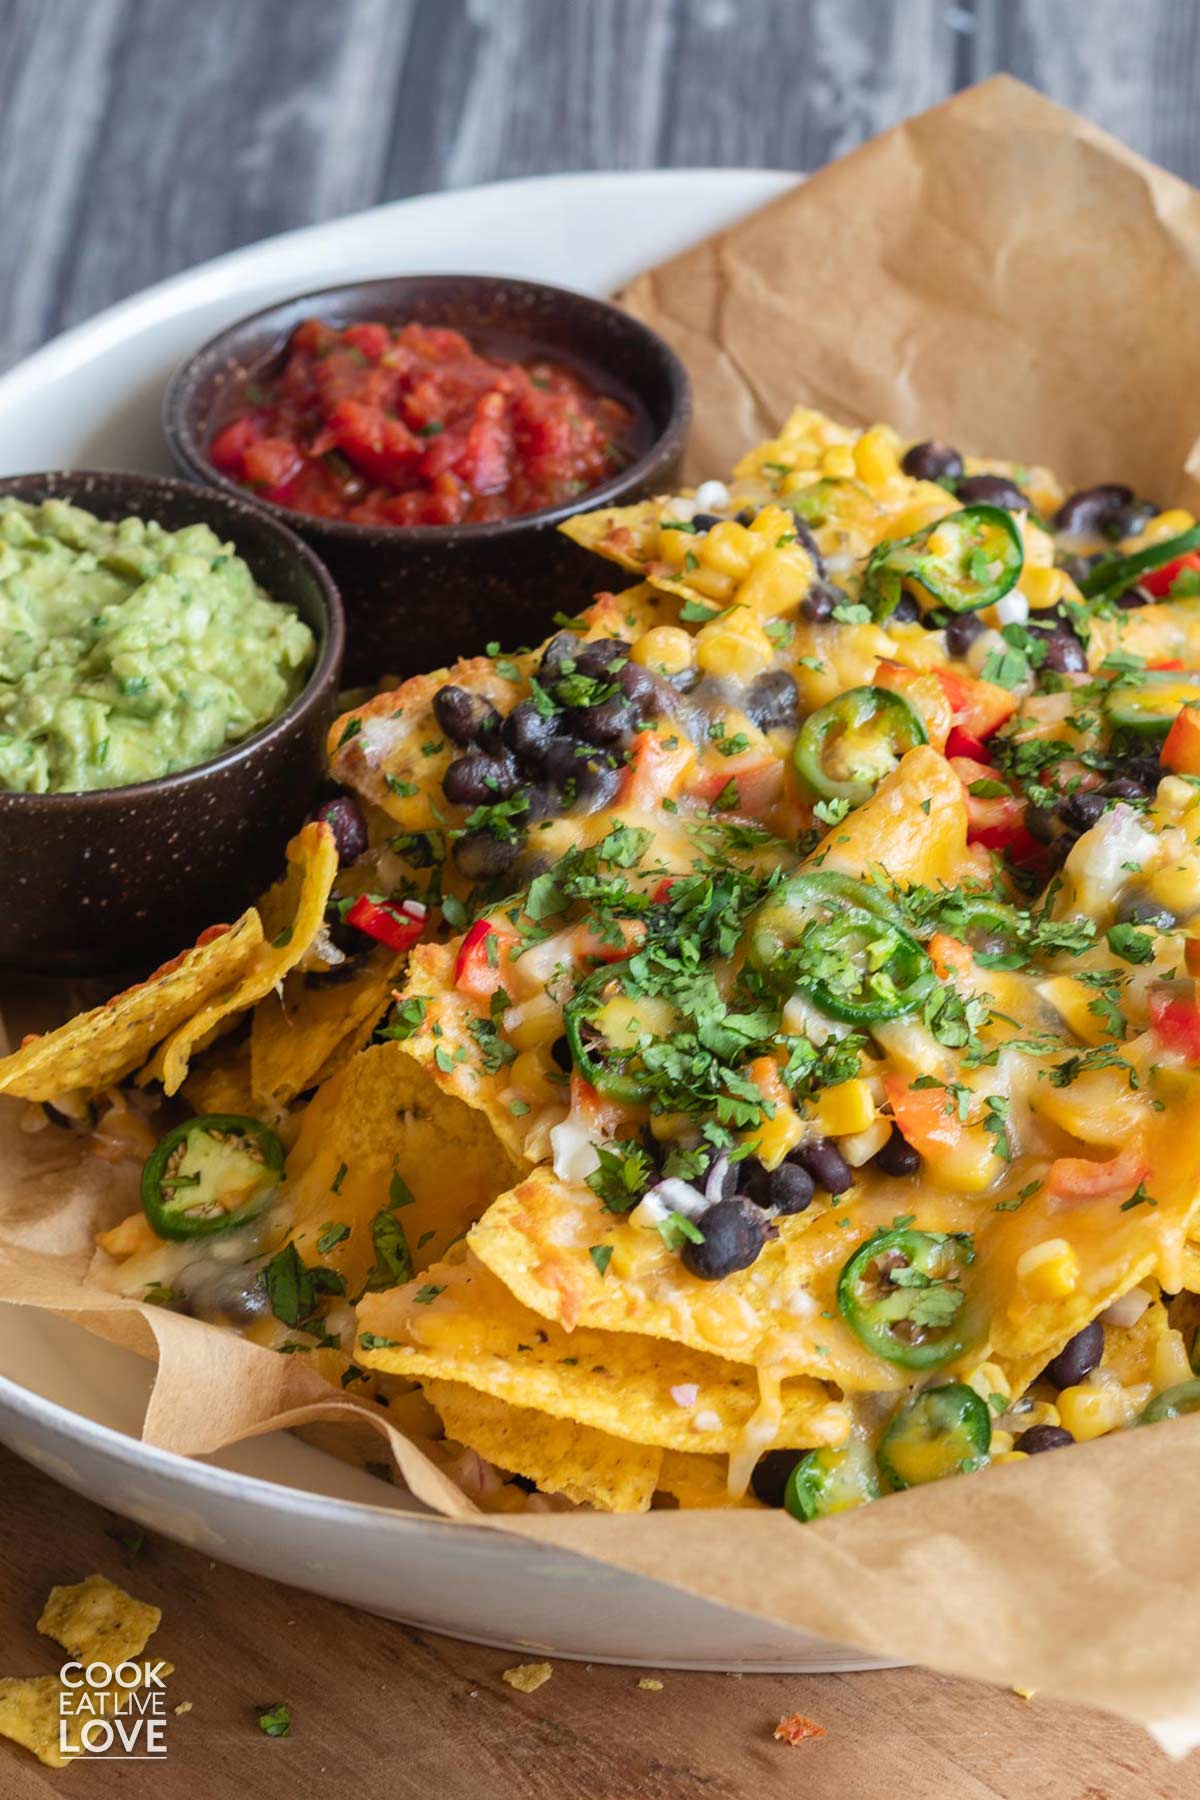 Platter of vegetarian nachos on the table with guacamole and salsa.